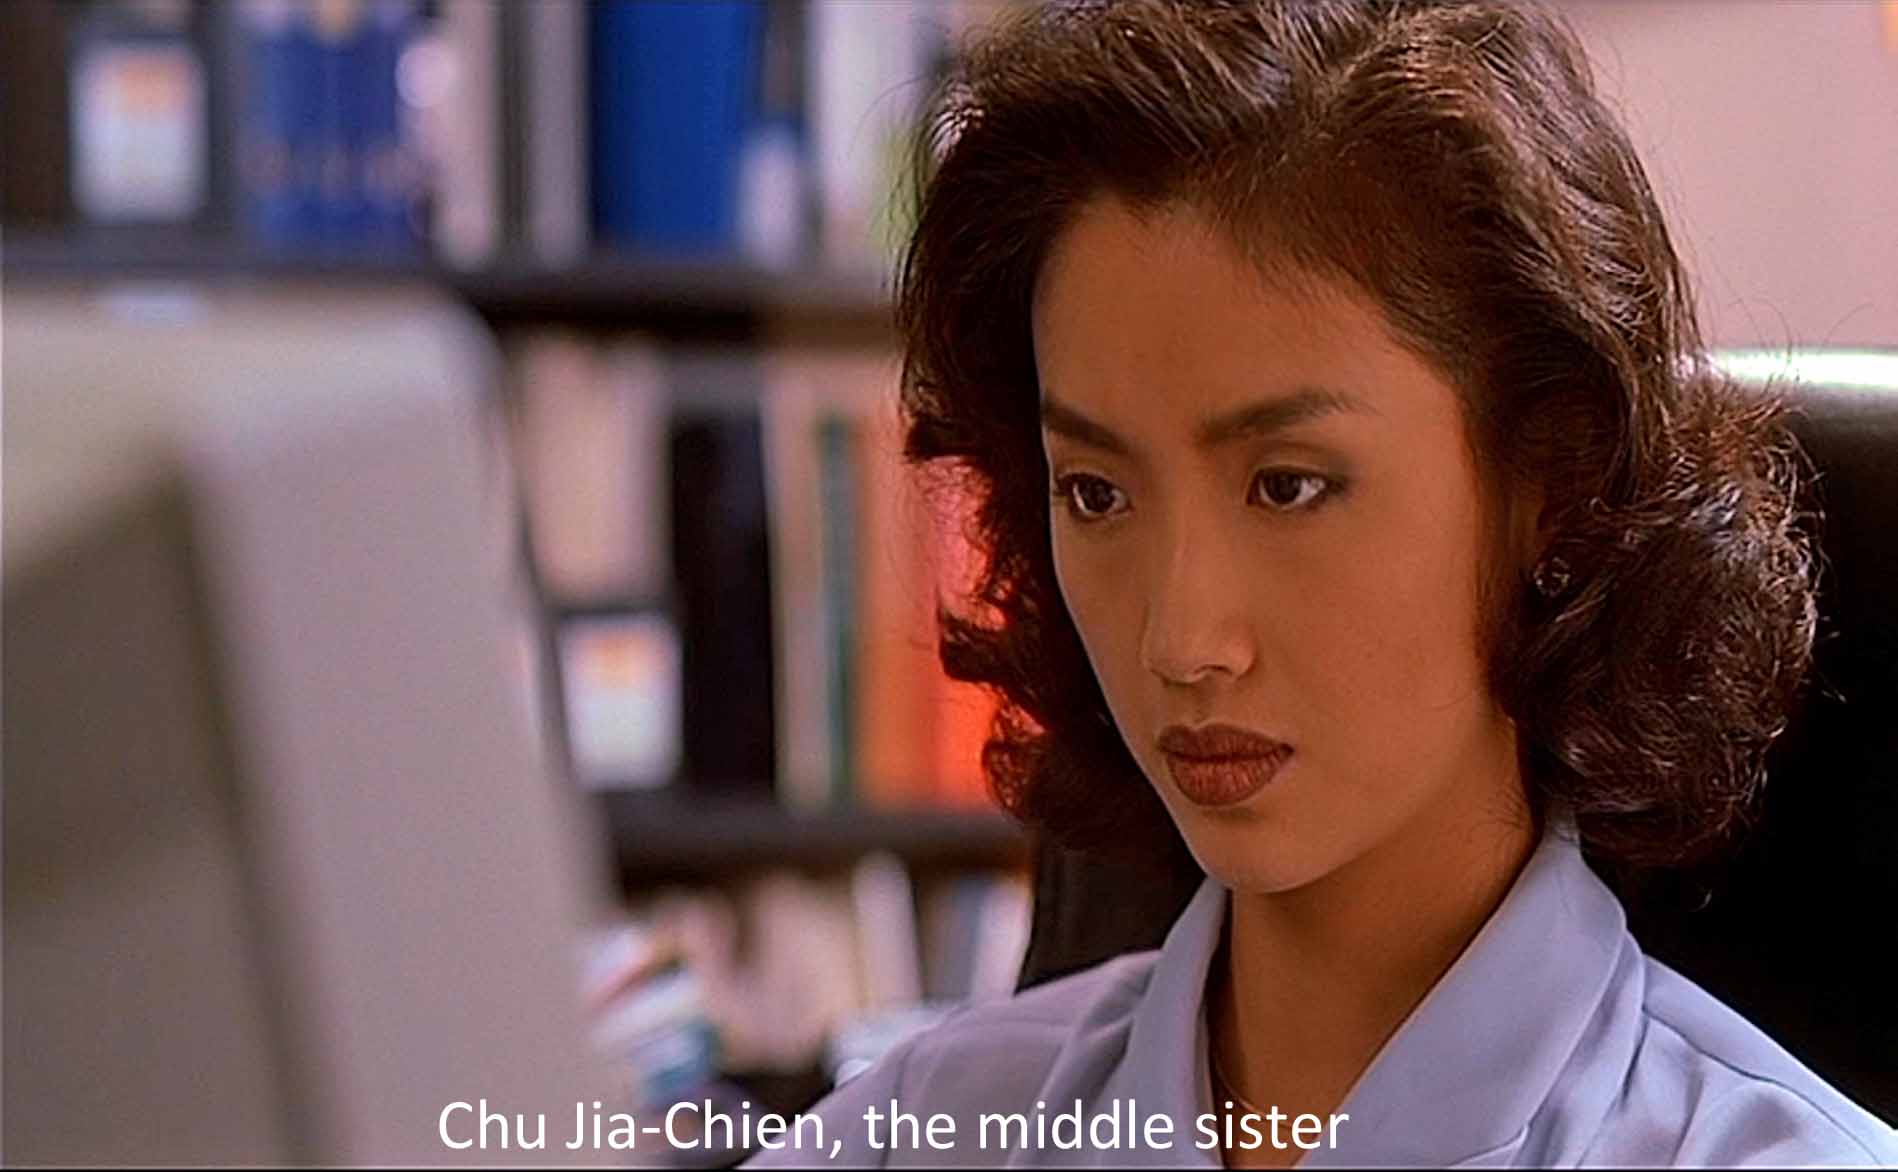 Chu Jia-Chien, the middle sister